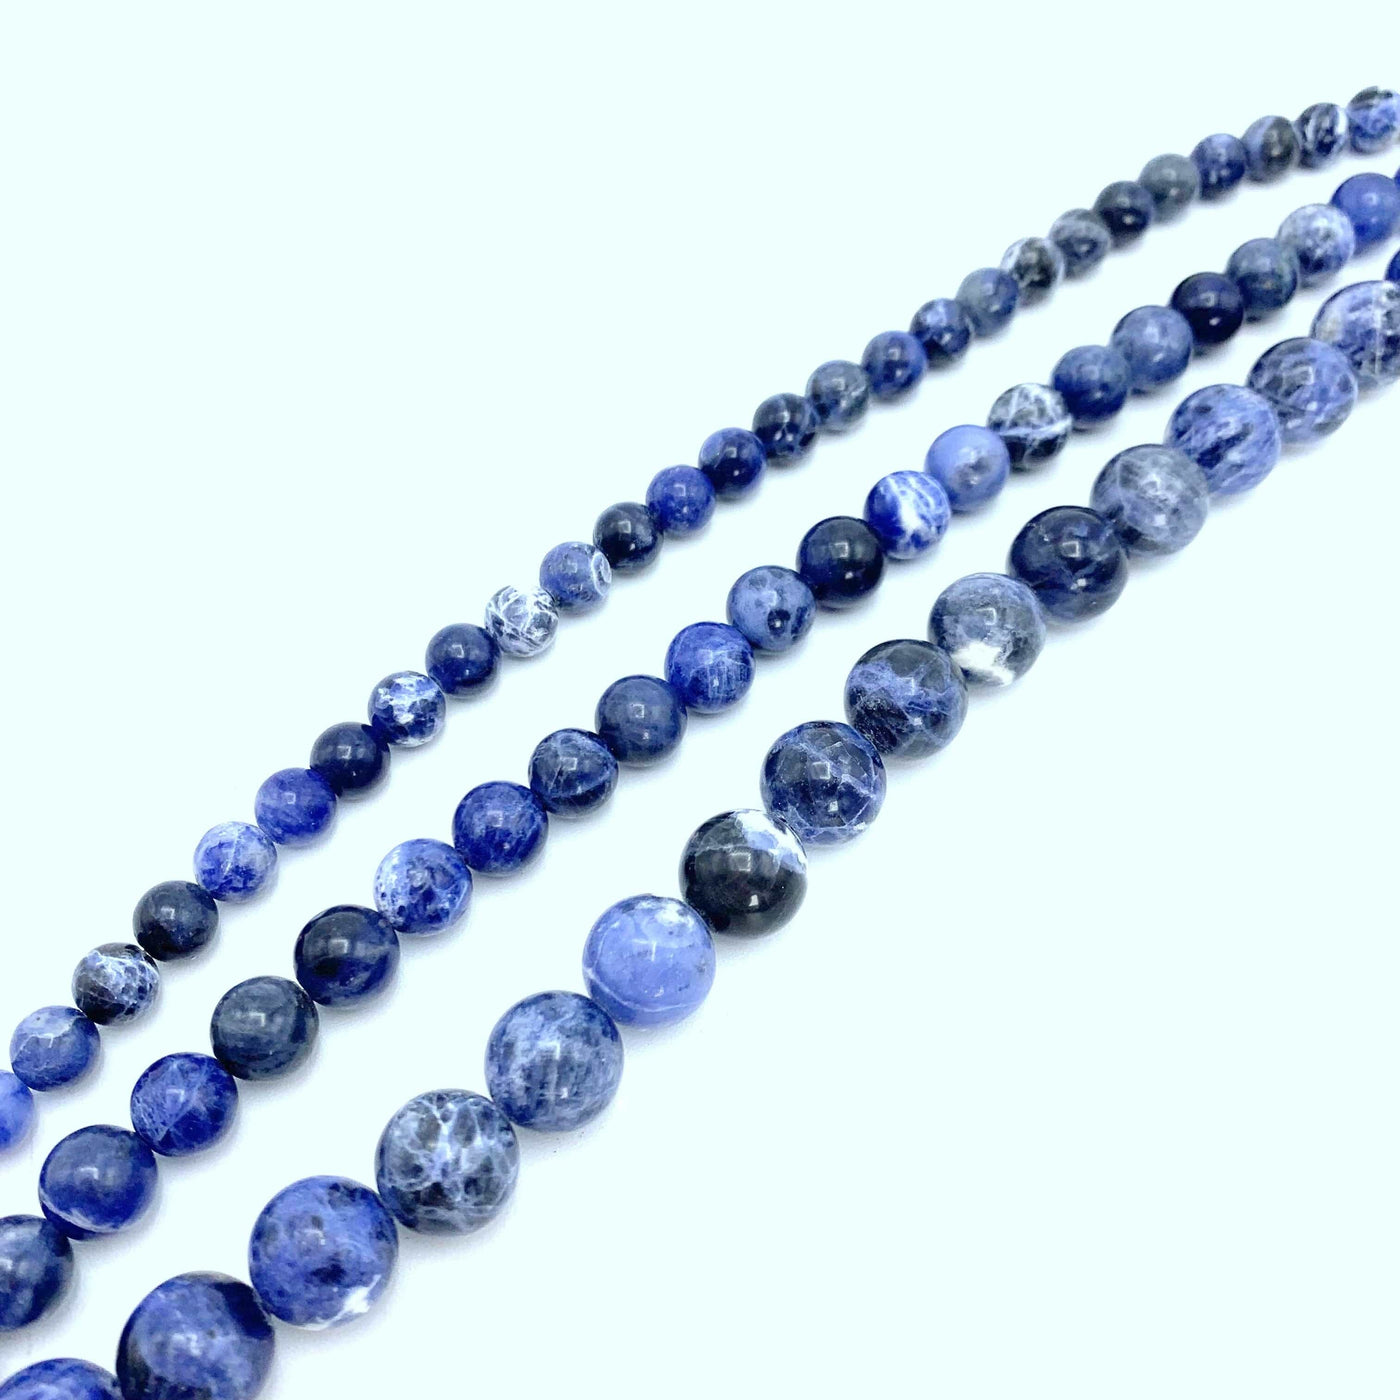 all 3 strands of sodalite beads from smallest to biggest (left to right) on a white background